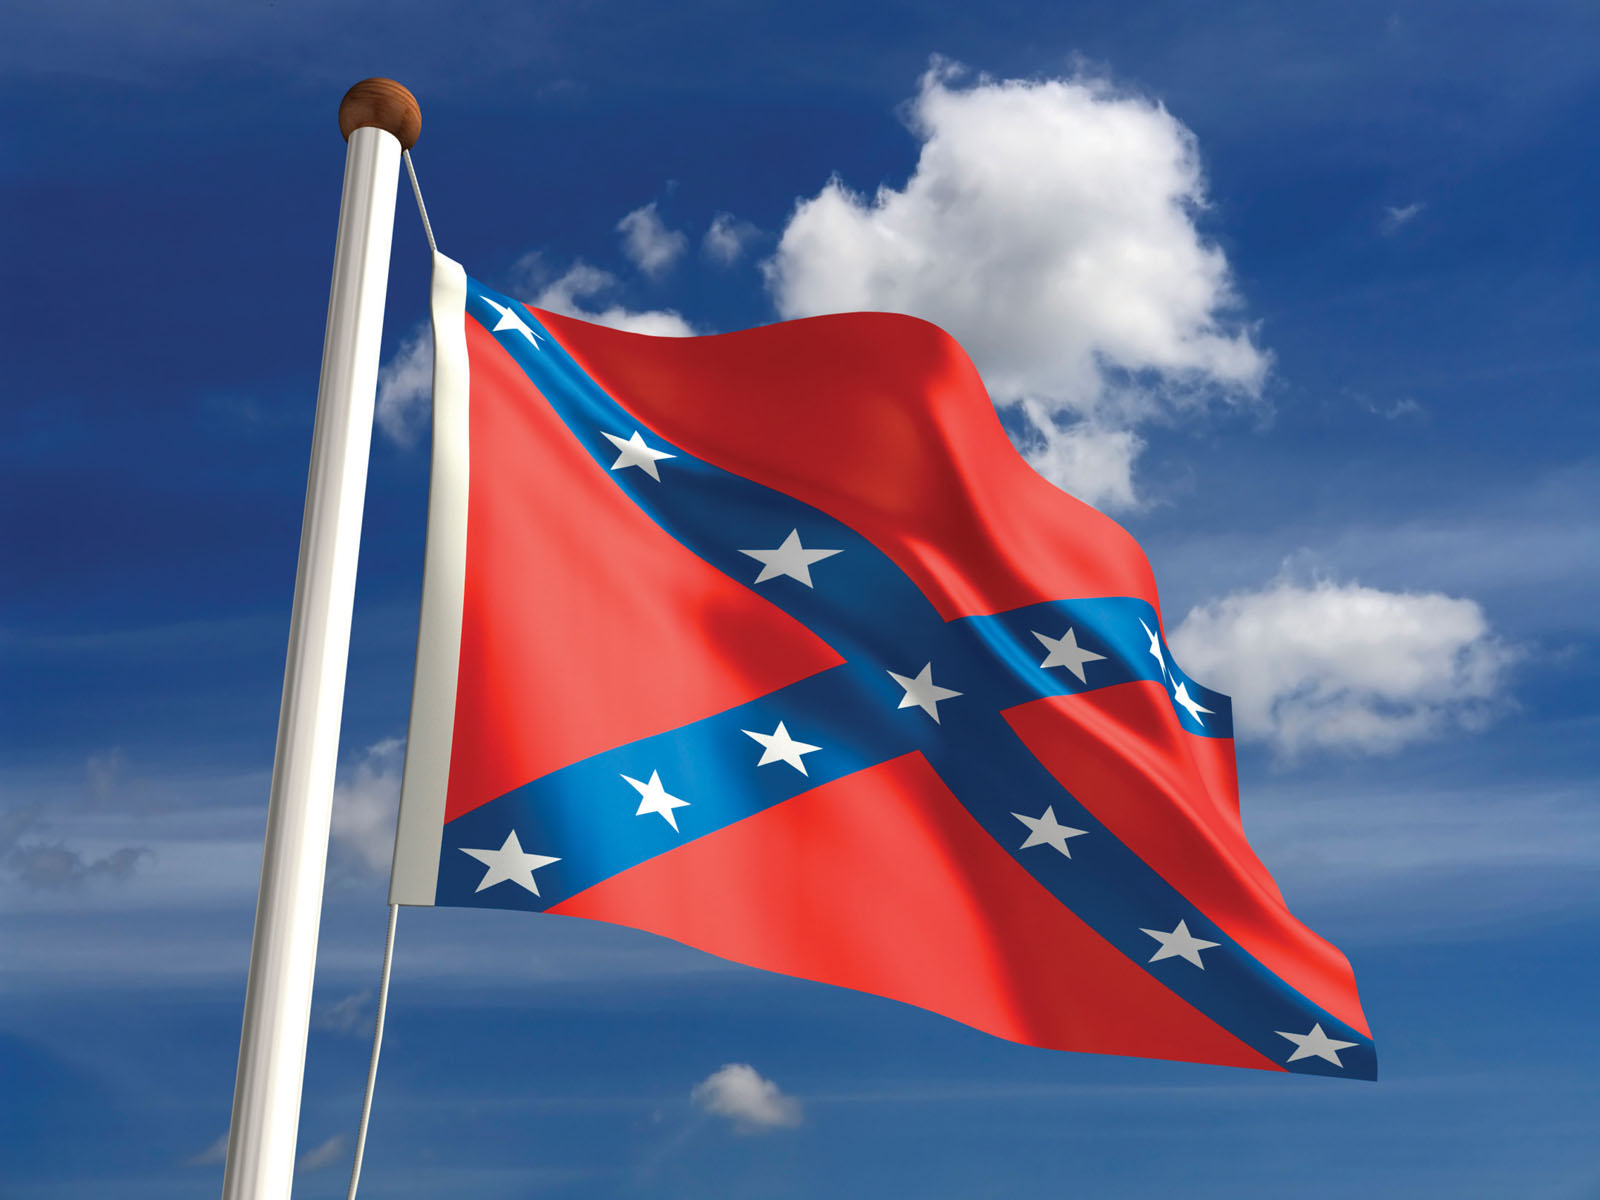 Rebel Flag Wallpapers Wallpapers, Backgrounds, Images, Art Photos